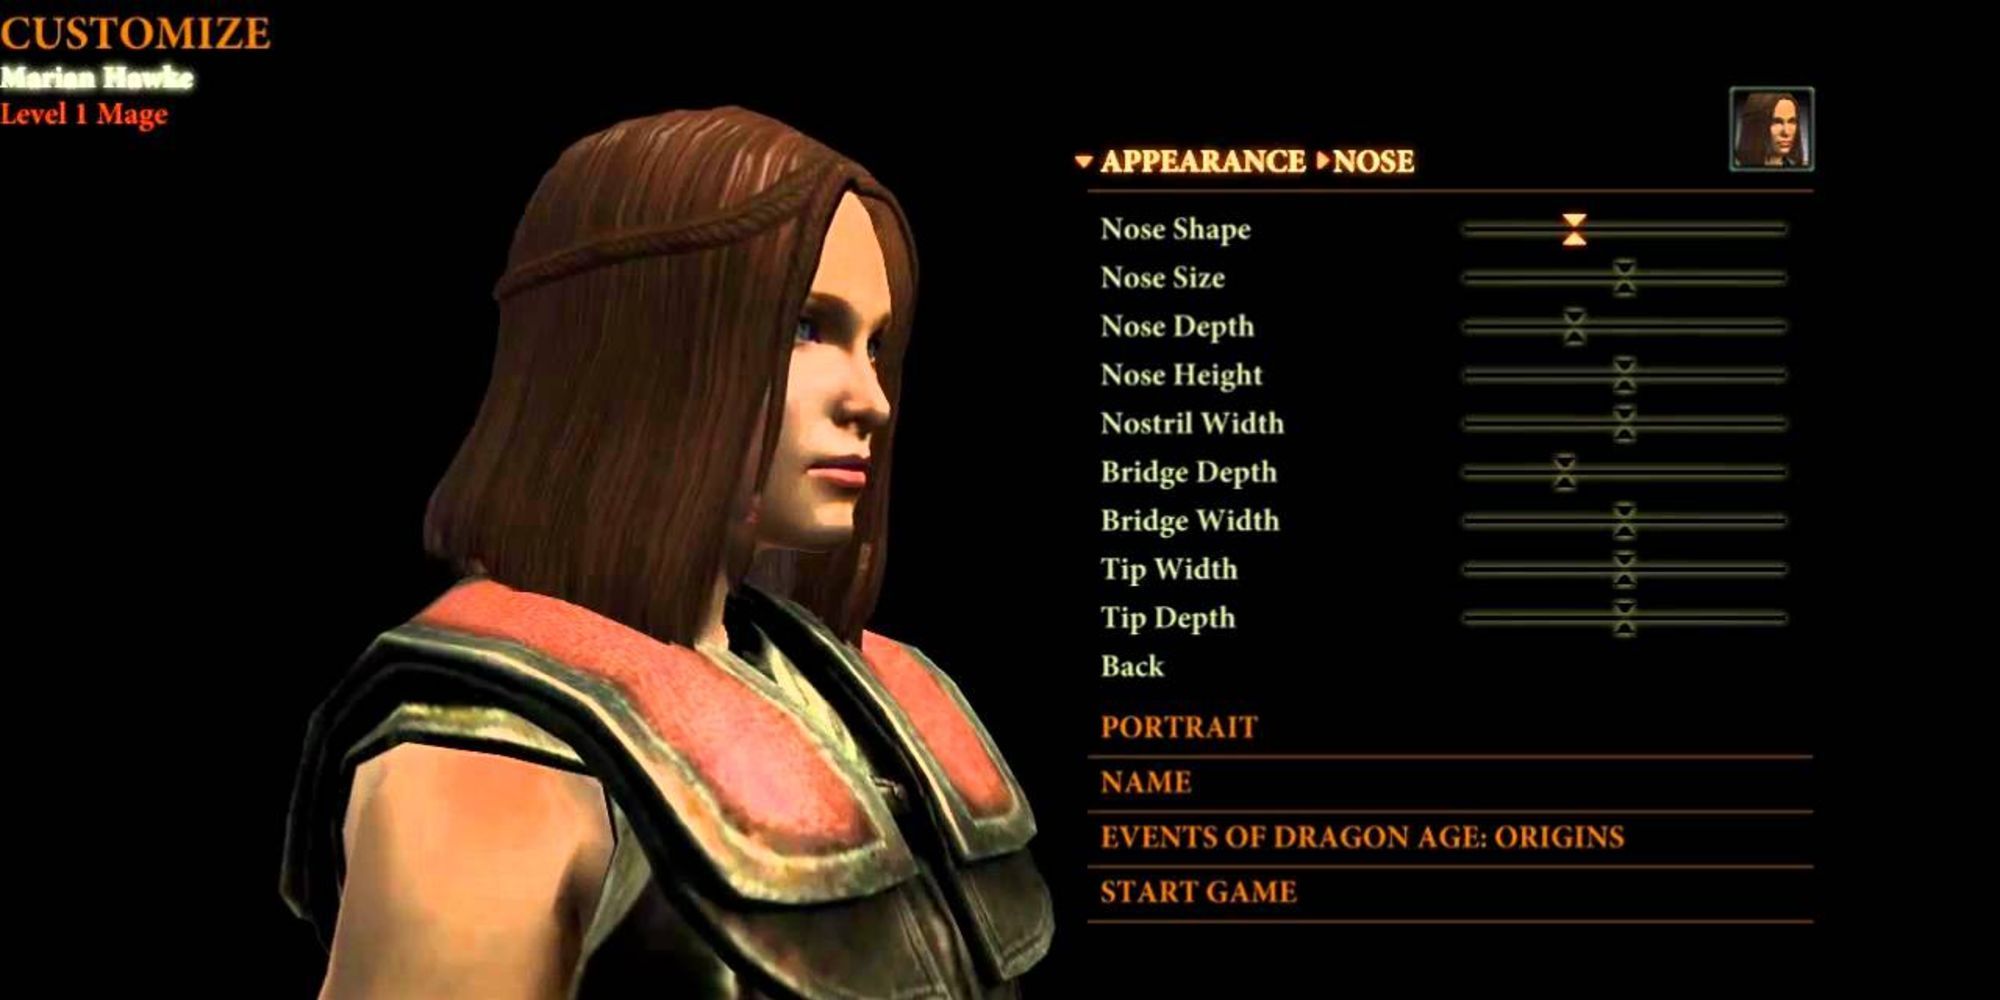 how to delete game saves dragon age 2 on pc